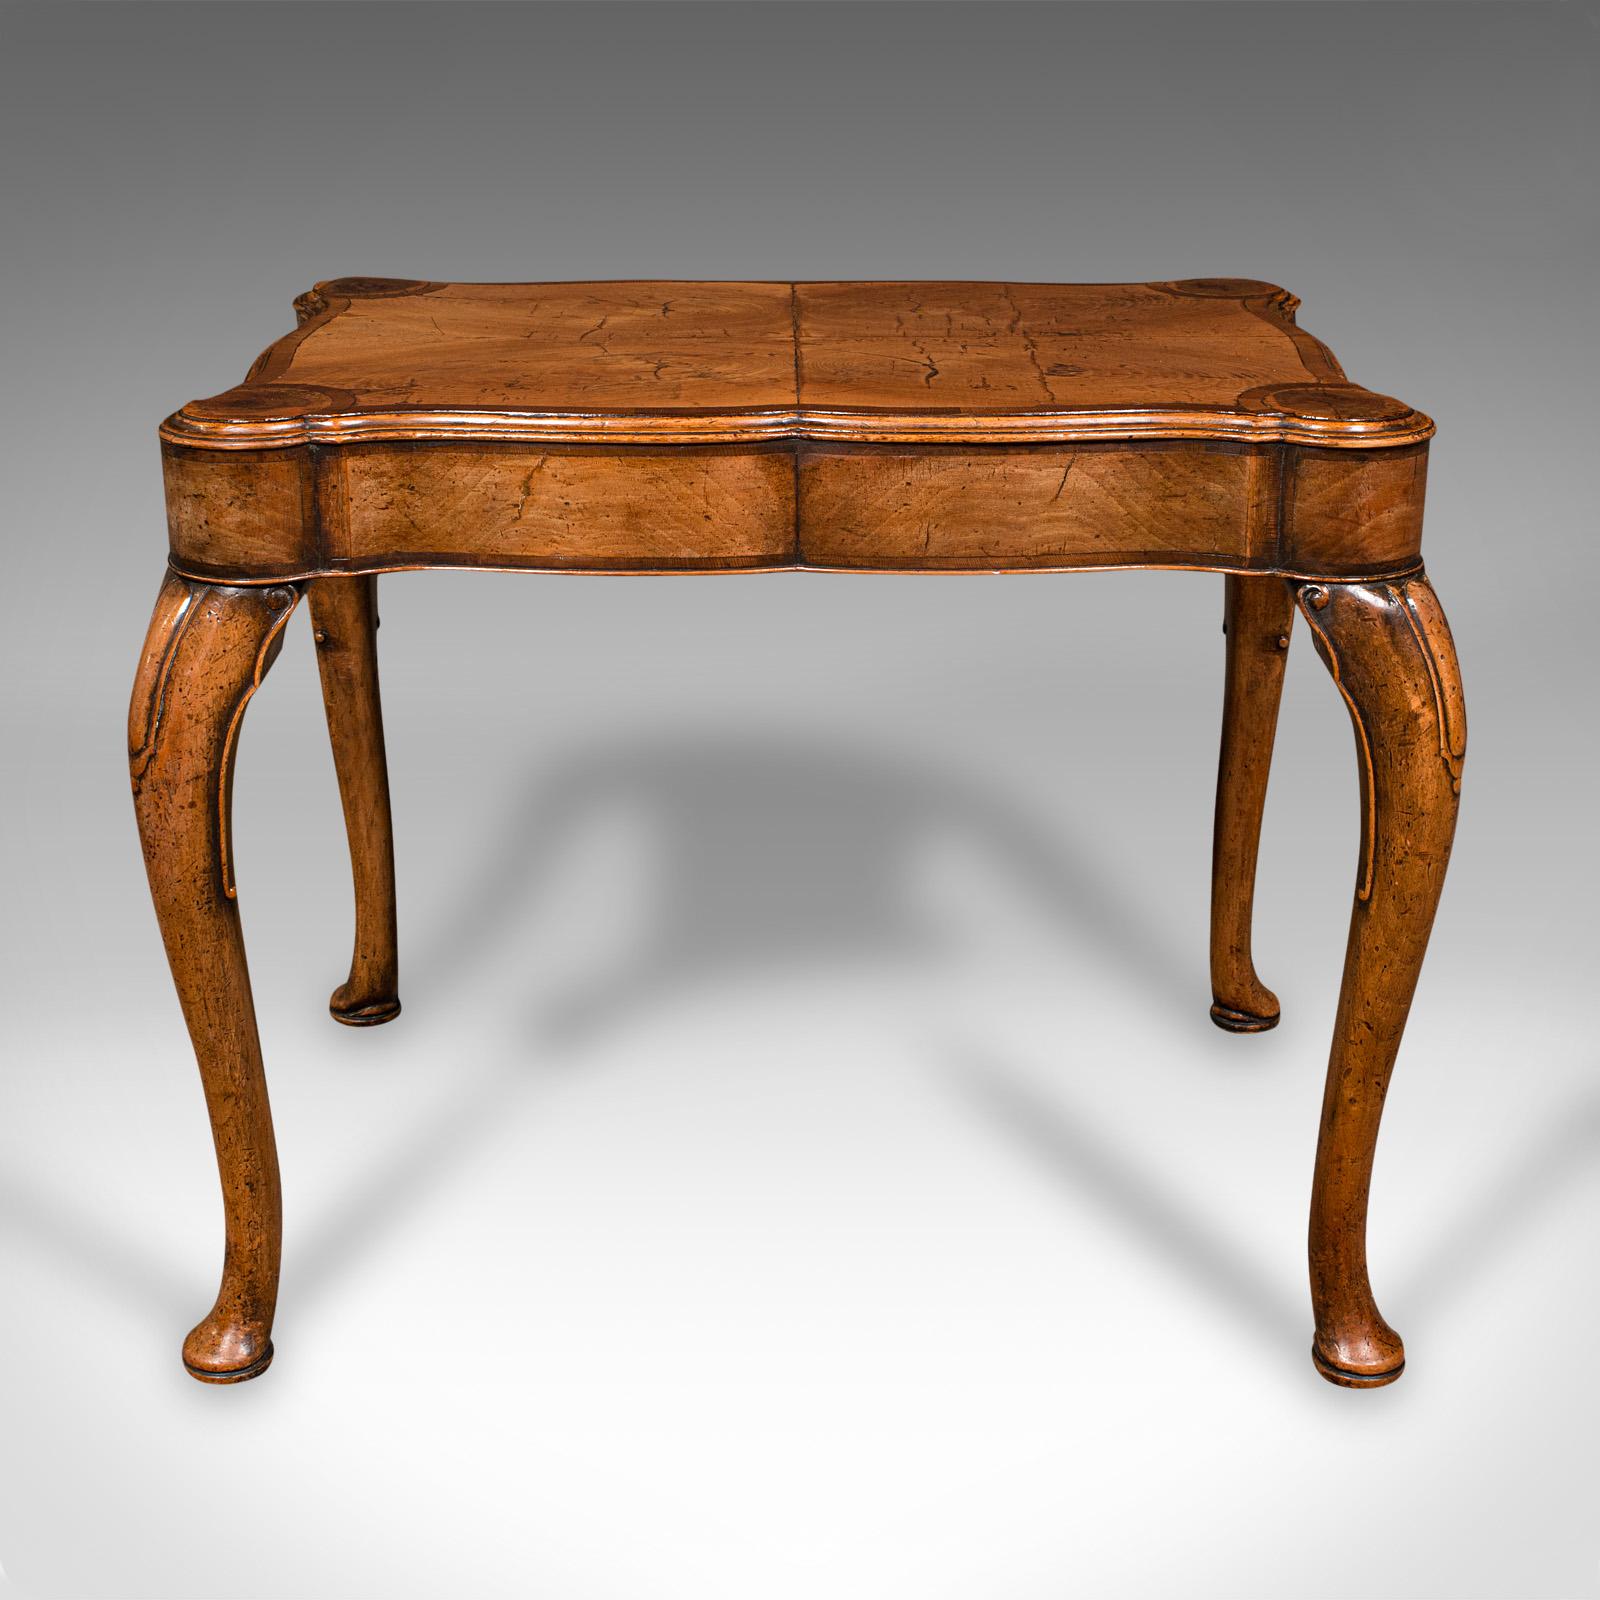 This is an antique quarterfoil lamp table. An English, walnut occasional table with Georgian revival taste, dating to the Art Deco period, circa 1920.

Delightfully crafted table with appealing form and finish
Displays a desirable aged patina and in